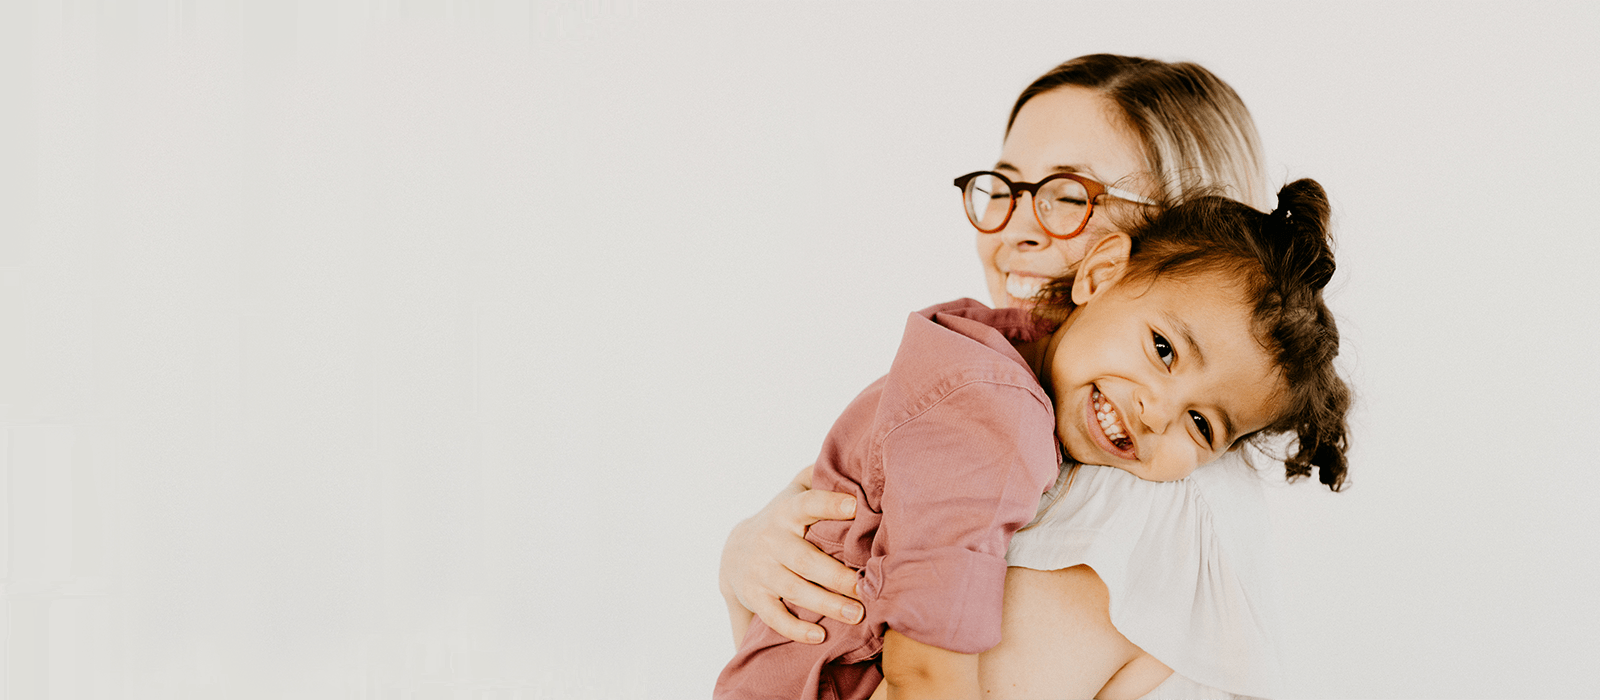 young girl smiling at the camera while being hugged by her mother